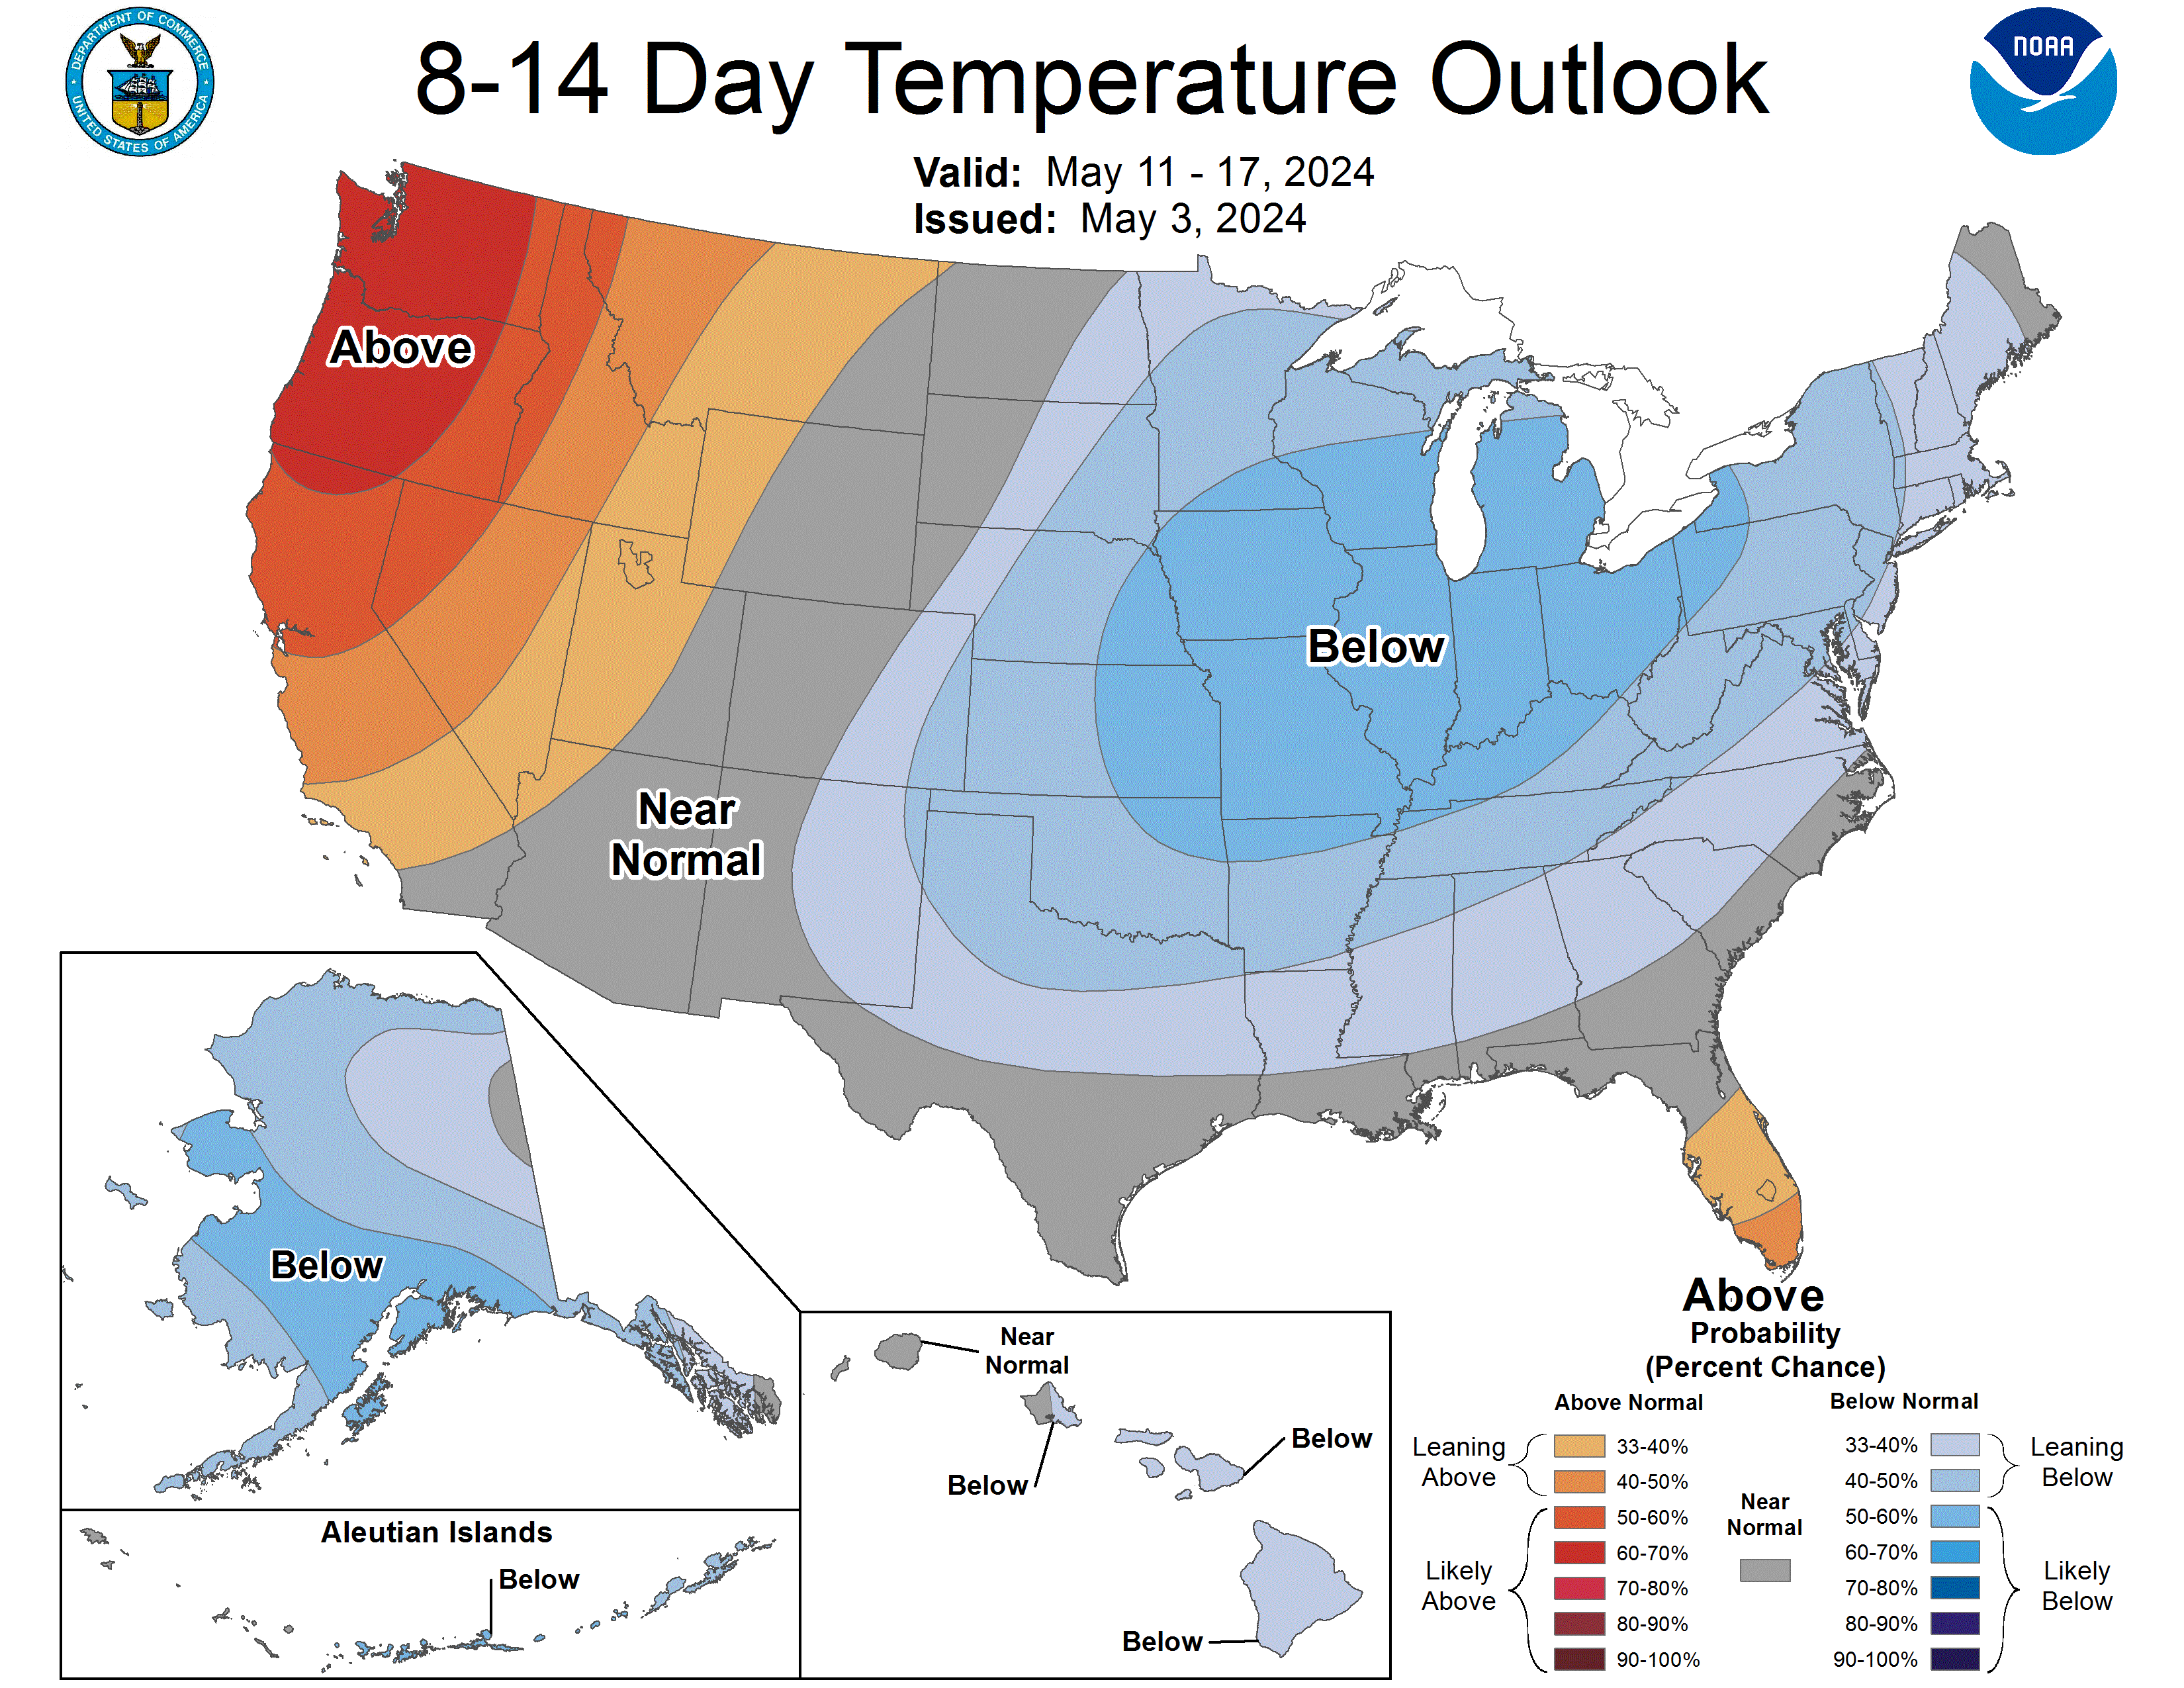 https://www.cpc.ncep.noaa.gov/products/predictions/814day/814temp.new.gif